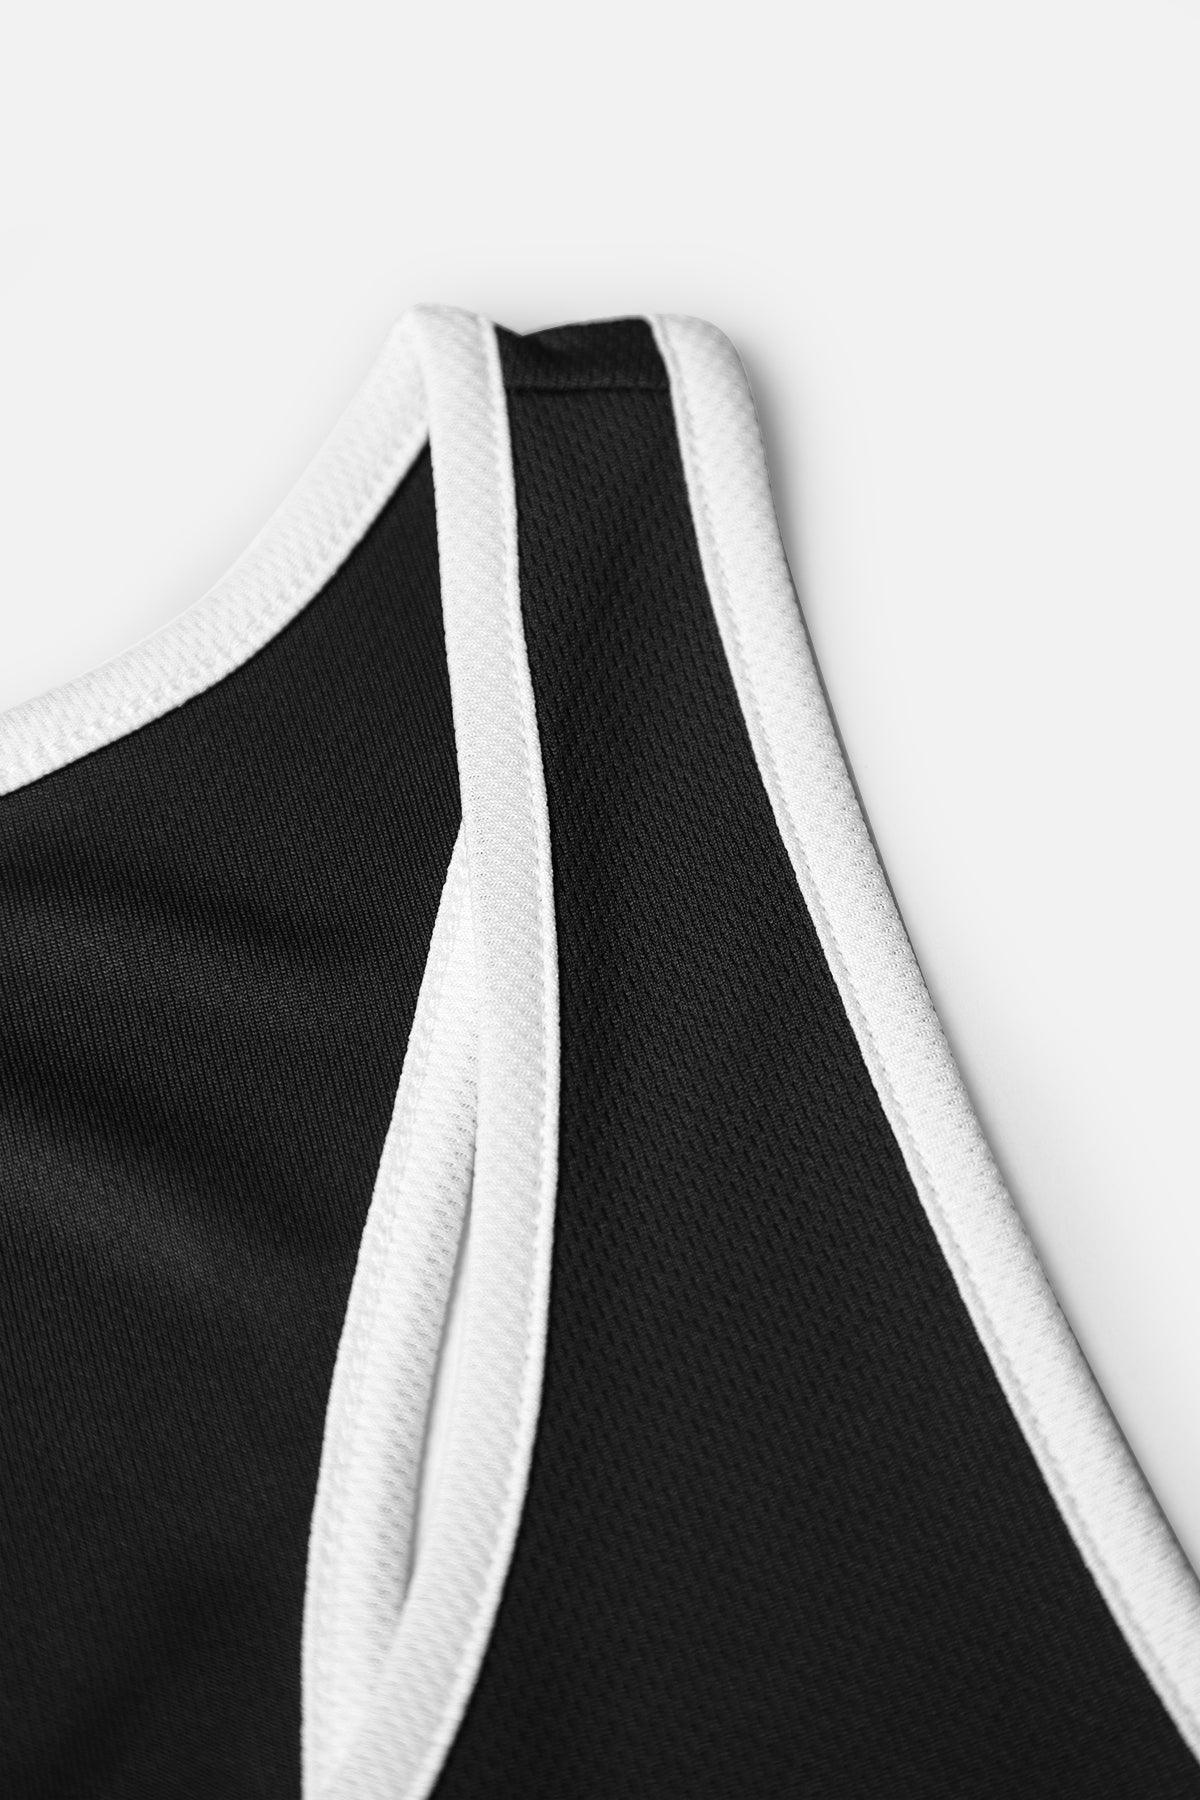 Fast-Dry Workout Stringer - Black & White - Jed North